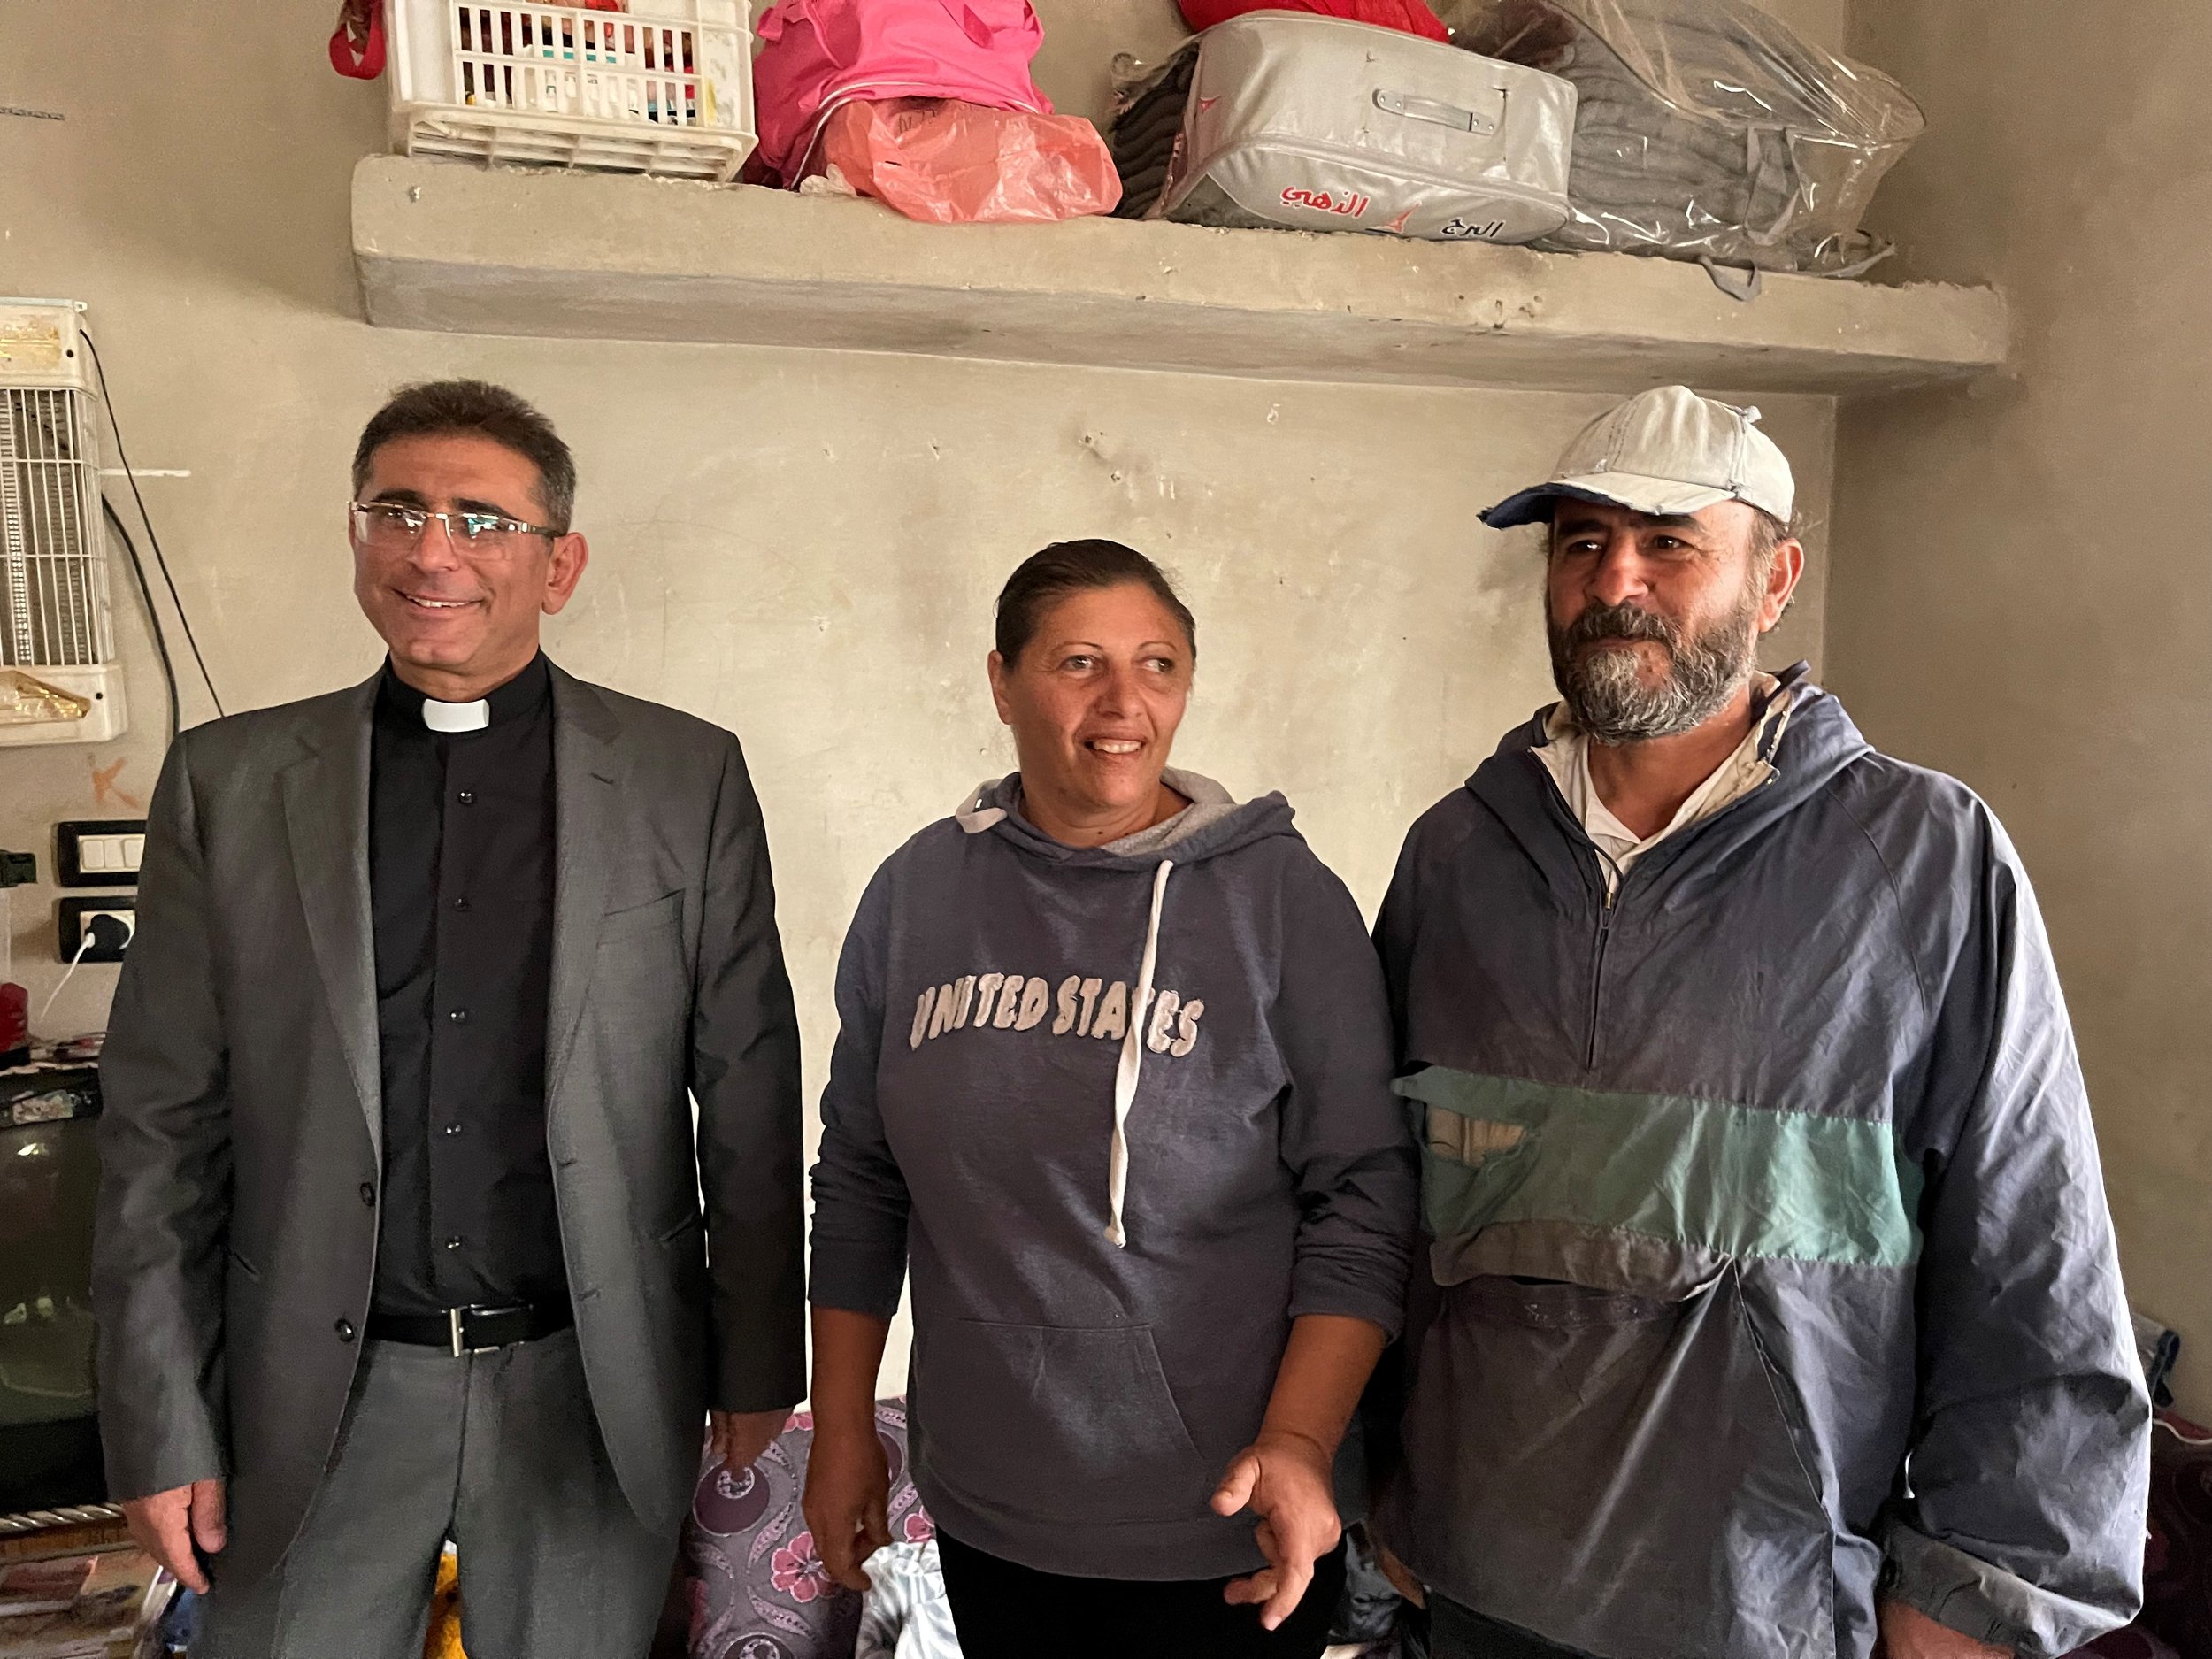  Rev. Saleem Farah with Ra’ida and Mazen whose home had been badly damaged by terrorists and all their belongings taken. They thank God that their lives were preserved along with their young children.   